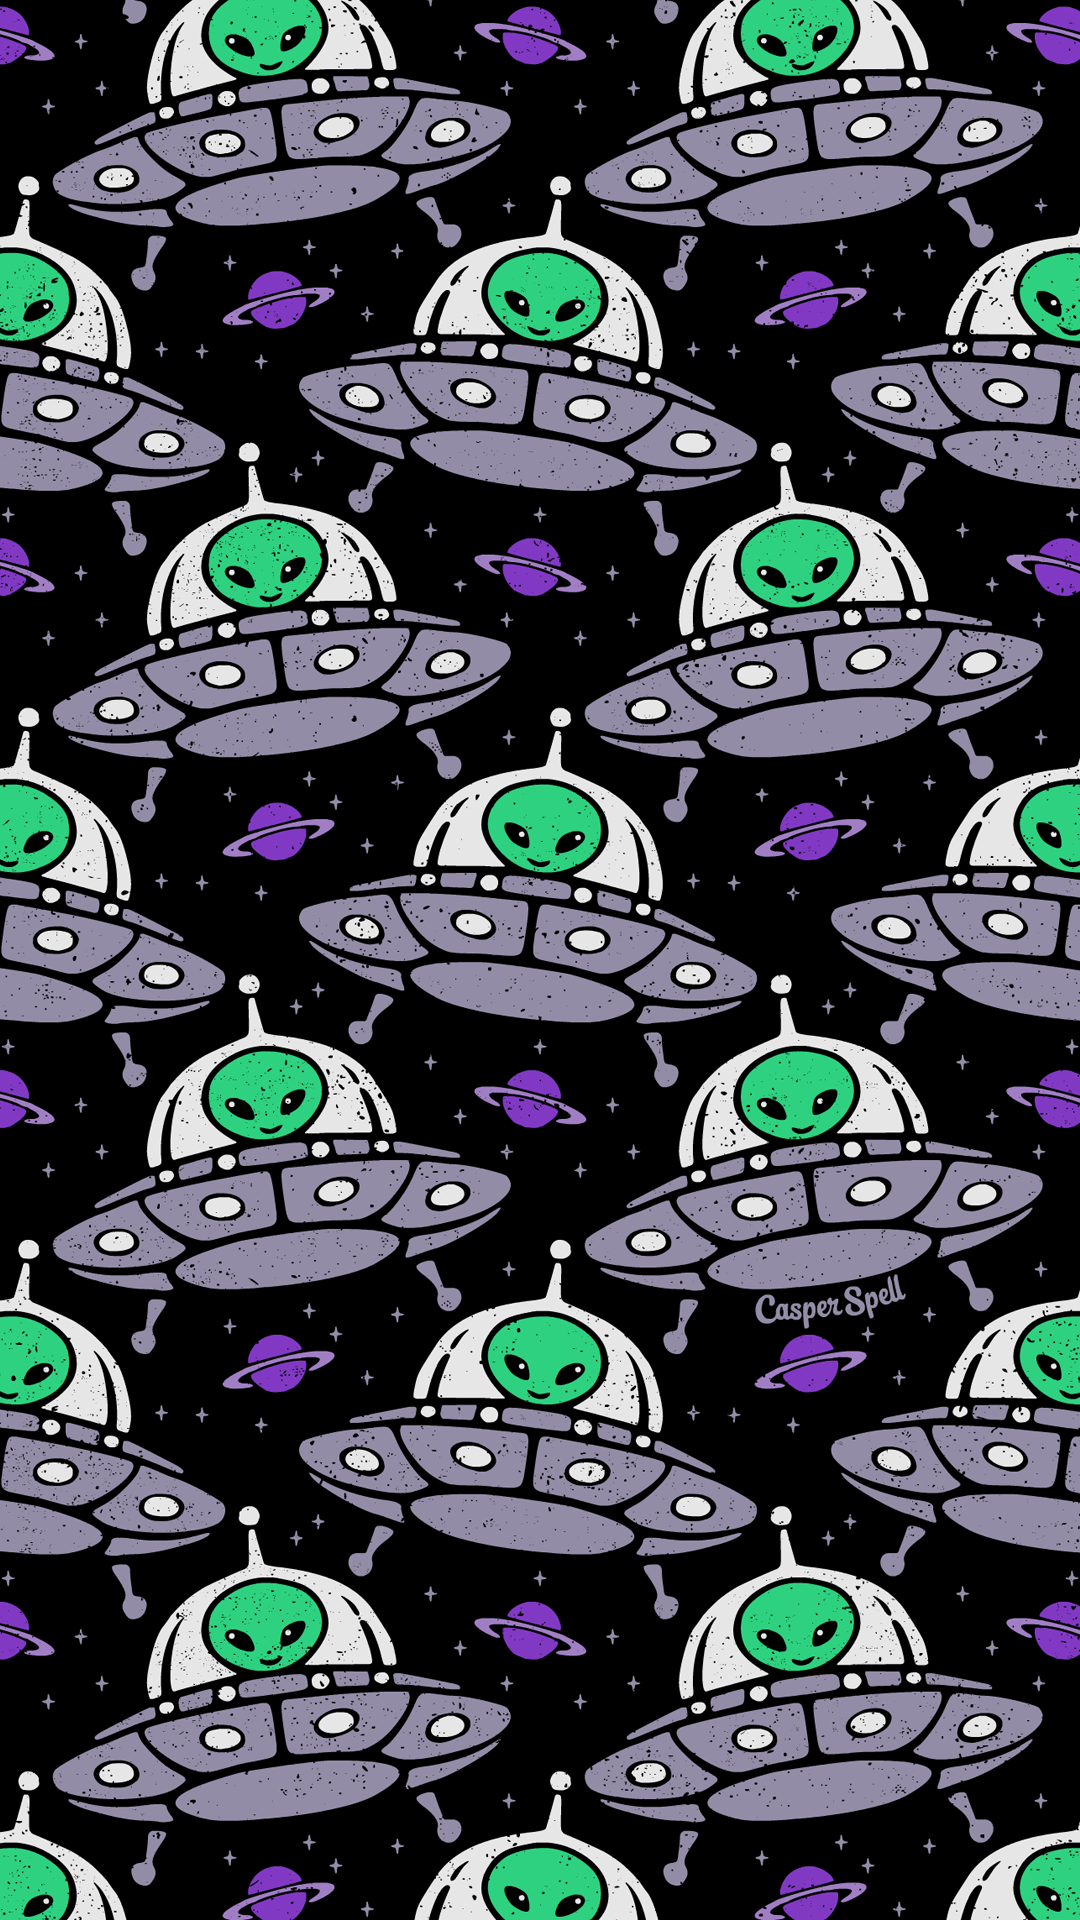 Flying Saucer” pattern for you! Feel .com